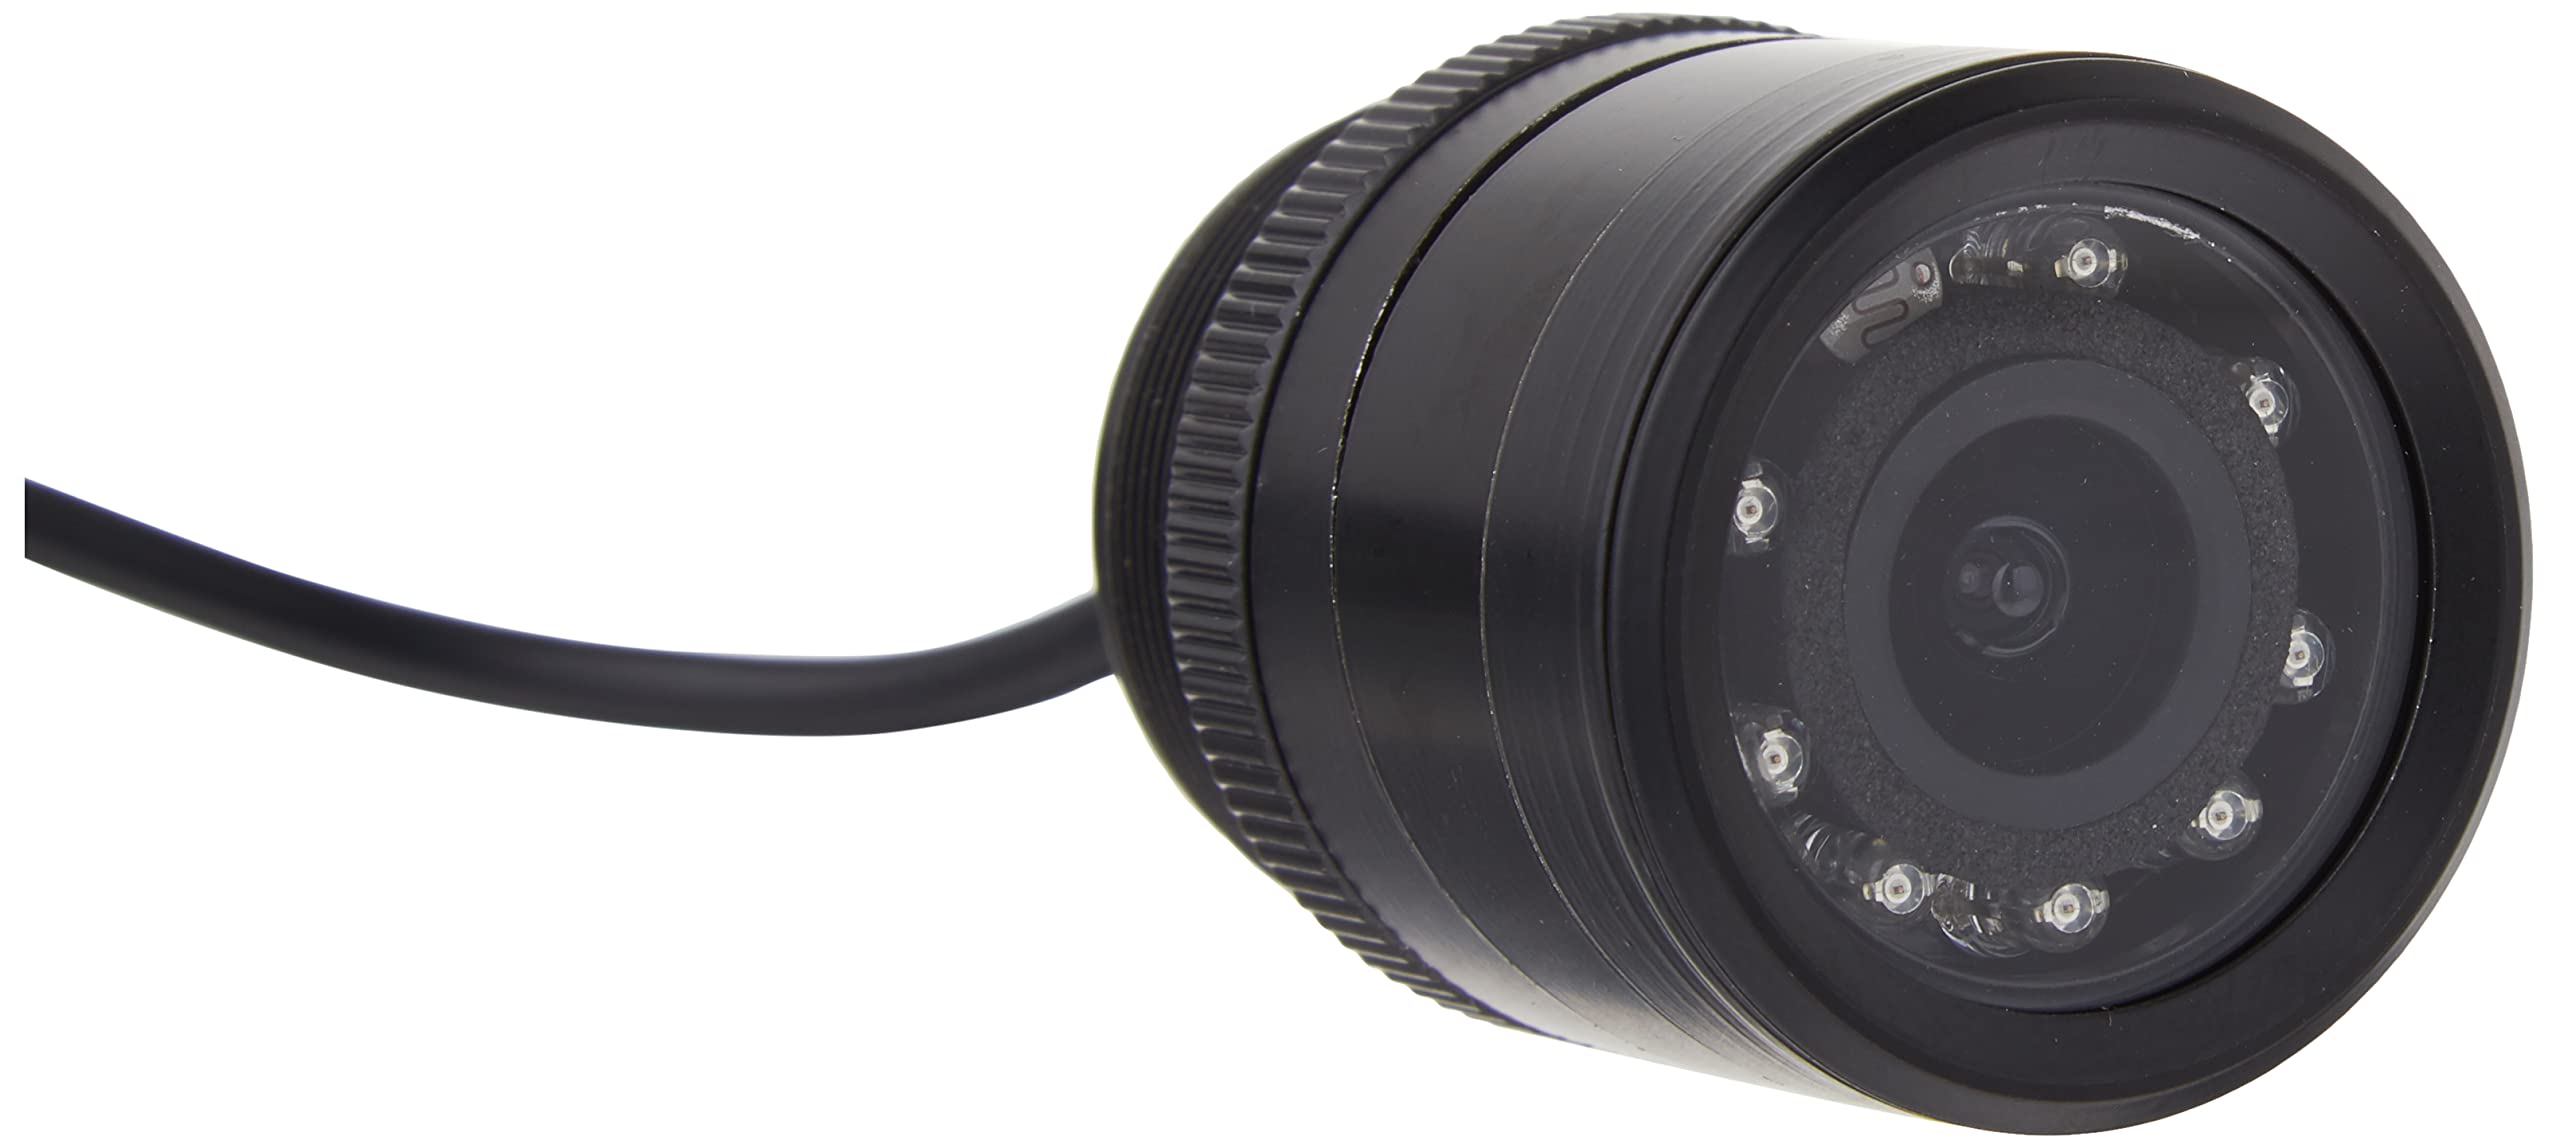 What Lux Is Best For A Night Vision Camera